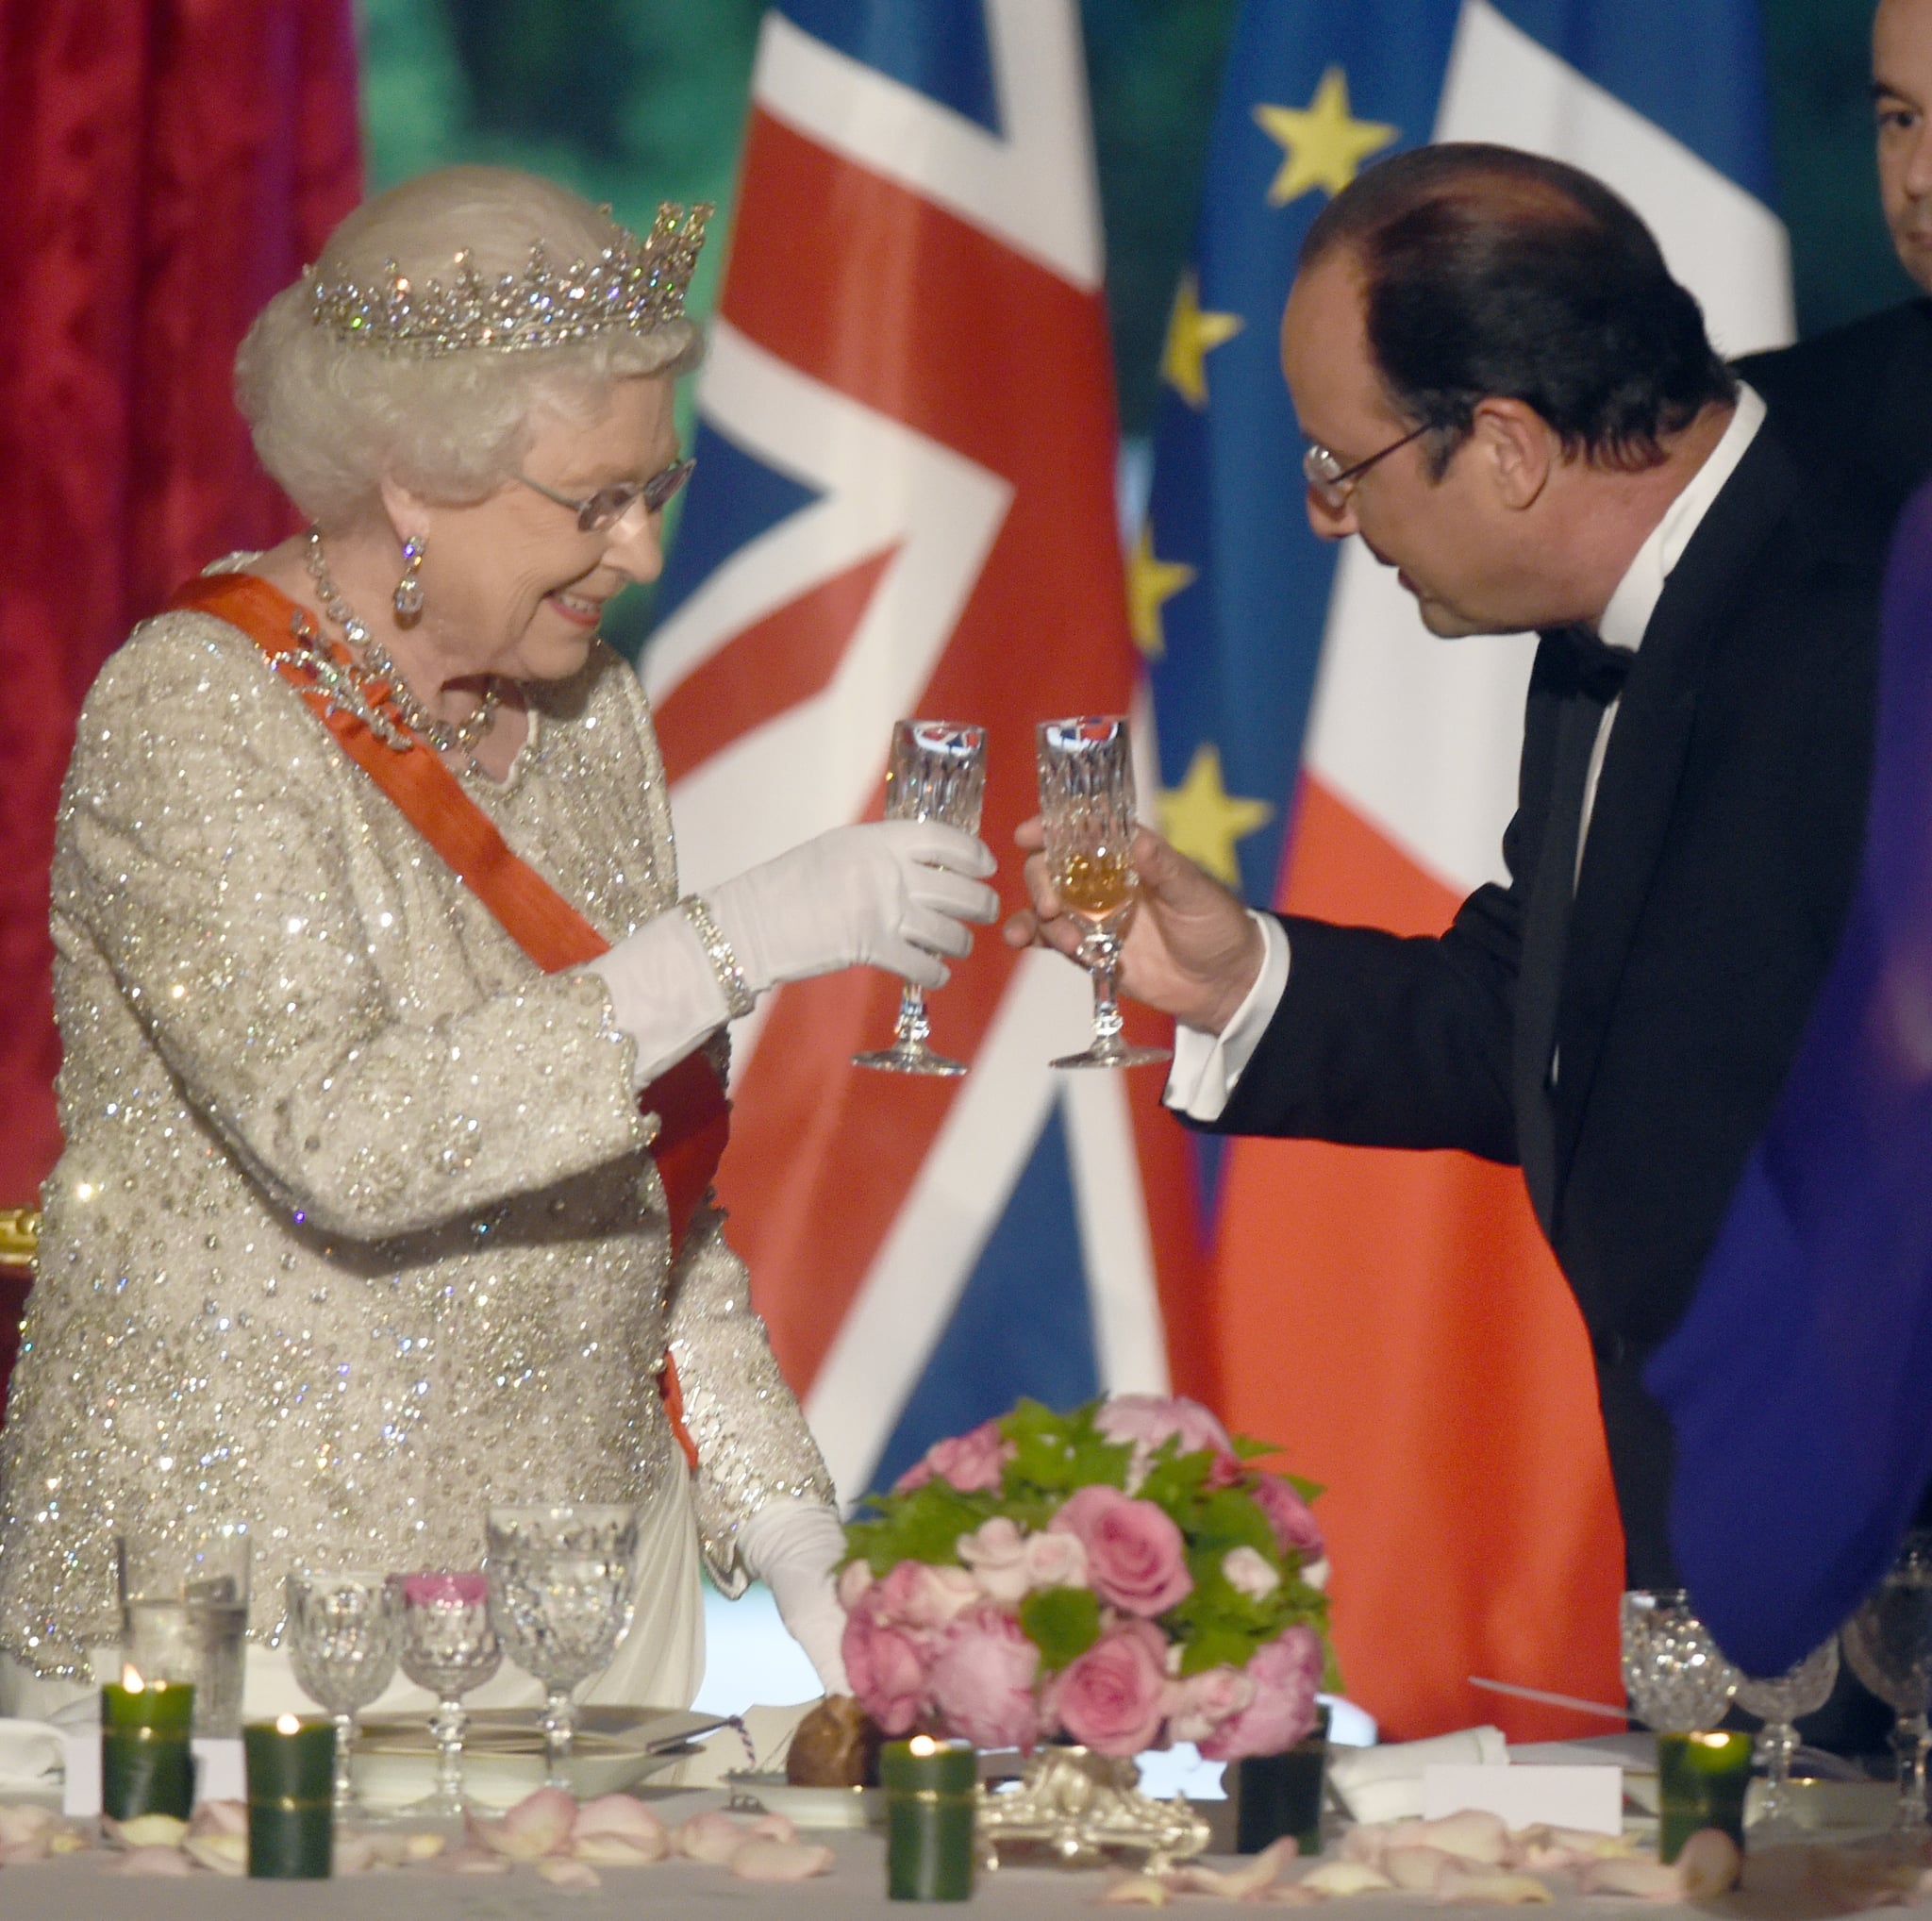 Queen Elizabeth II and French President Francois Hollande share a toast in 2014